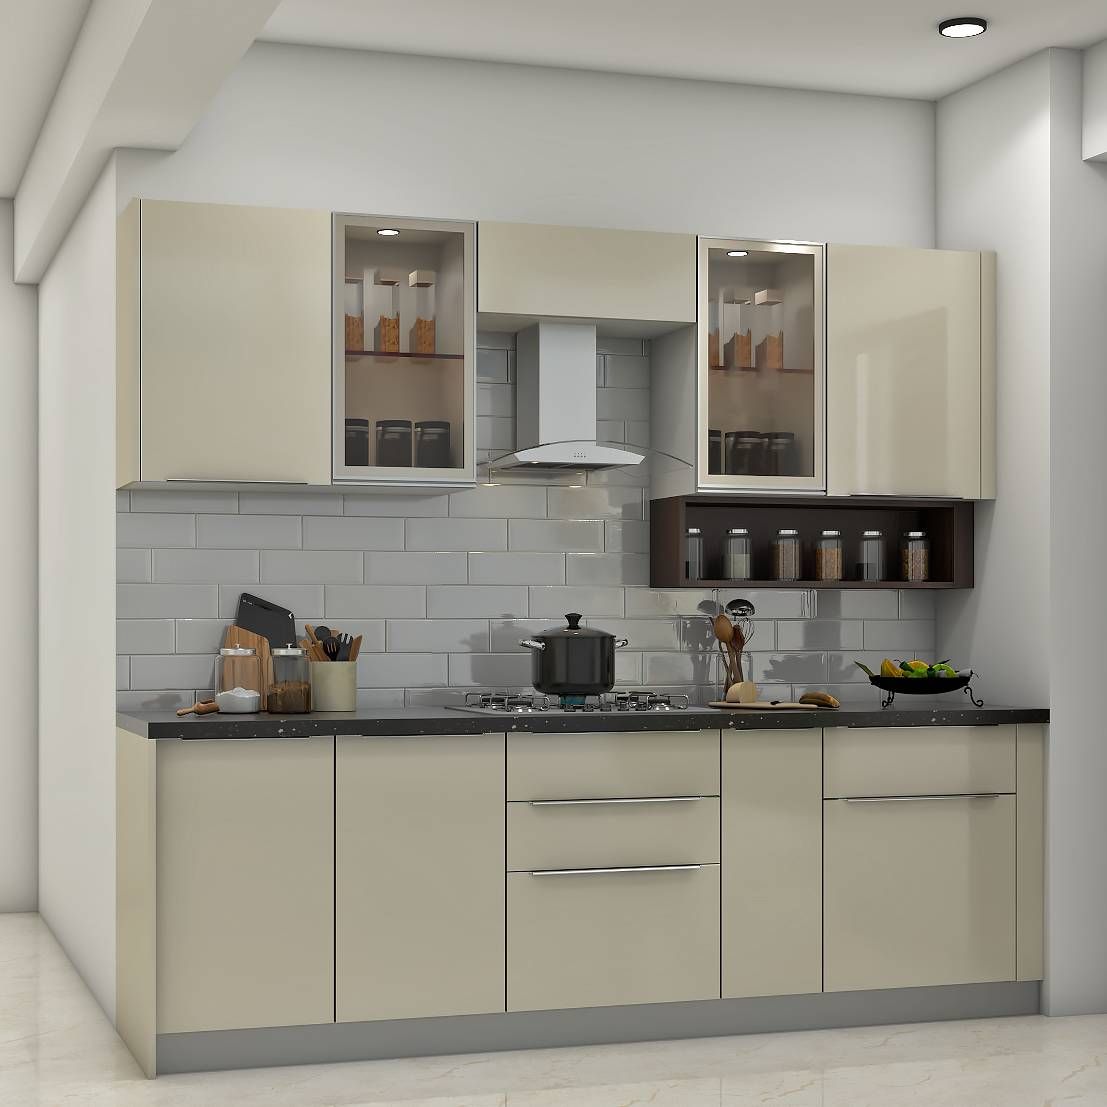 Modern Modular Indian Kitchen Design With Frosty White Cabinetry